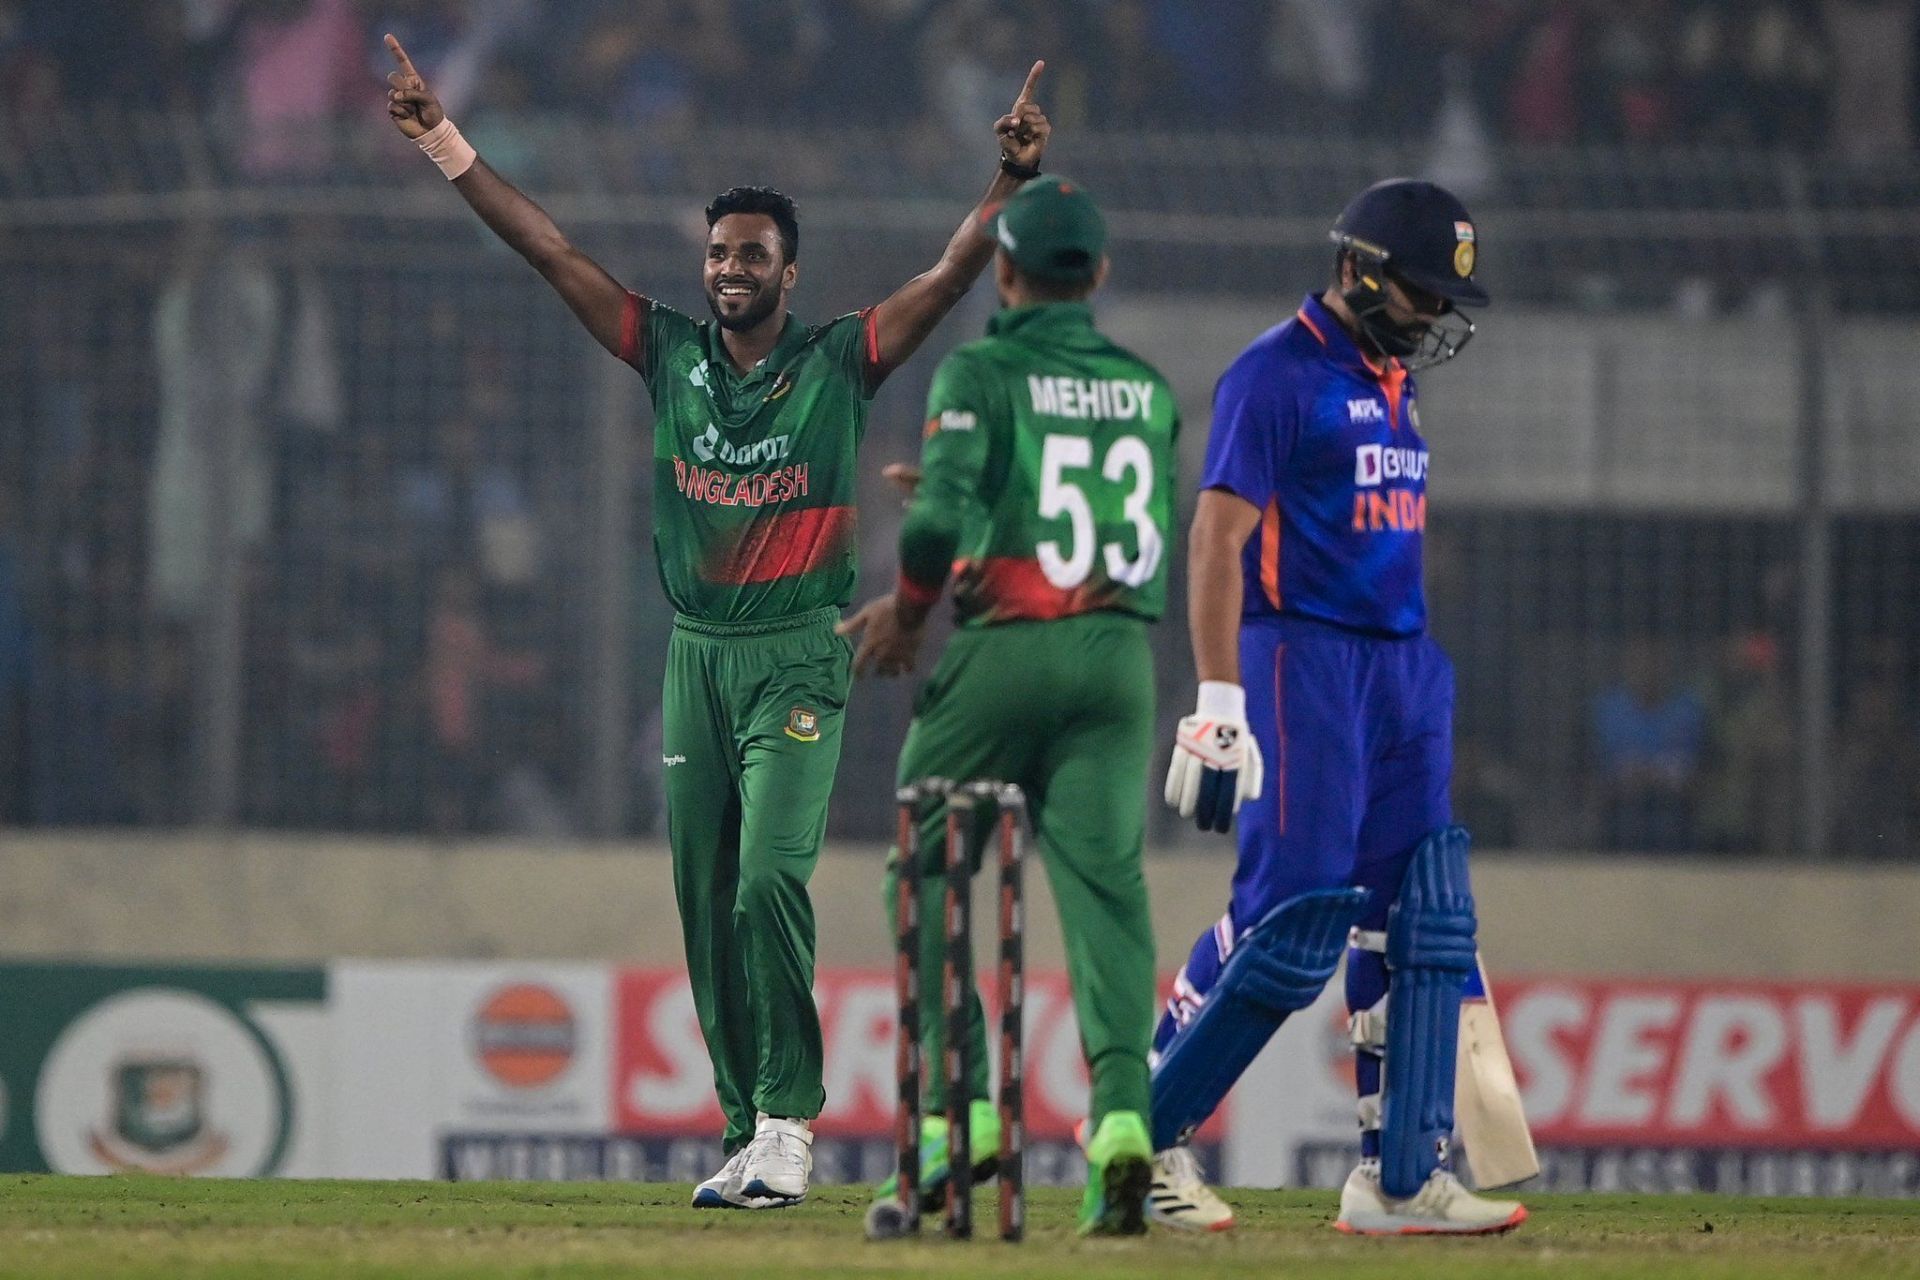 India lost the second ODI against Bangladesh in Dhaka [Pic Credit: Twitter]